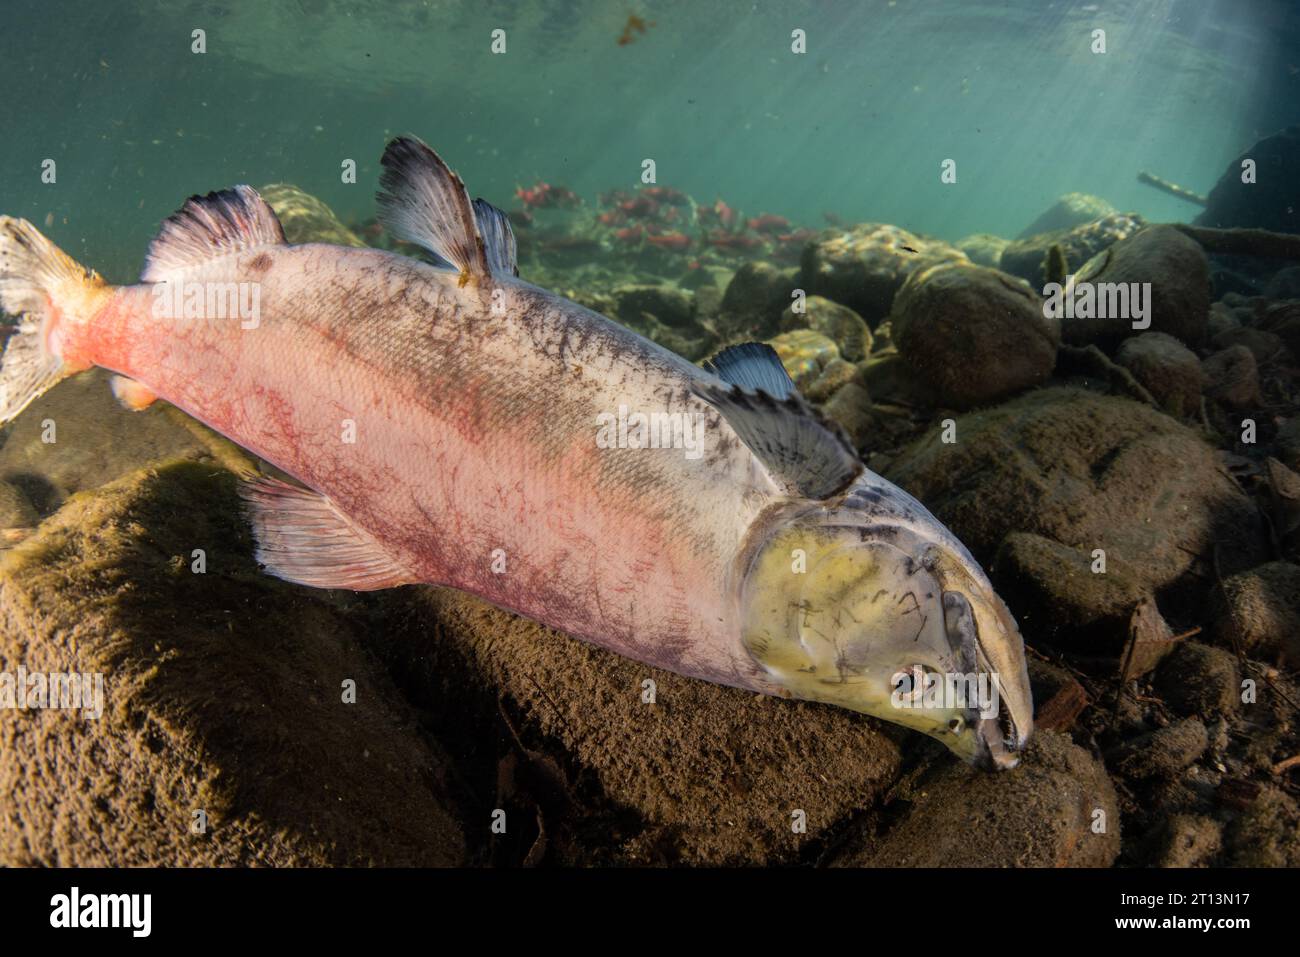 Kokanee salmon (Oncorhynchus nerka), the fish die several days after spawning and this individual lays on the bottom of a river. Stock Photo